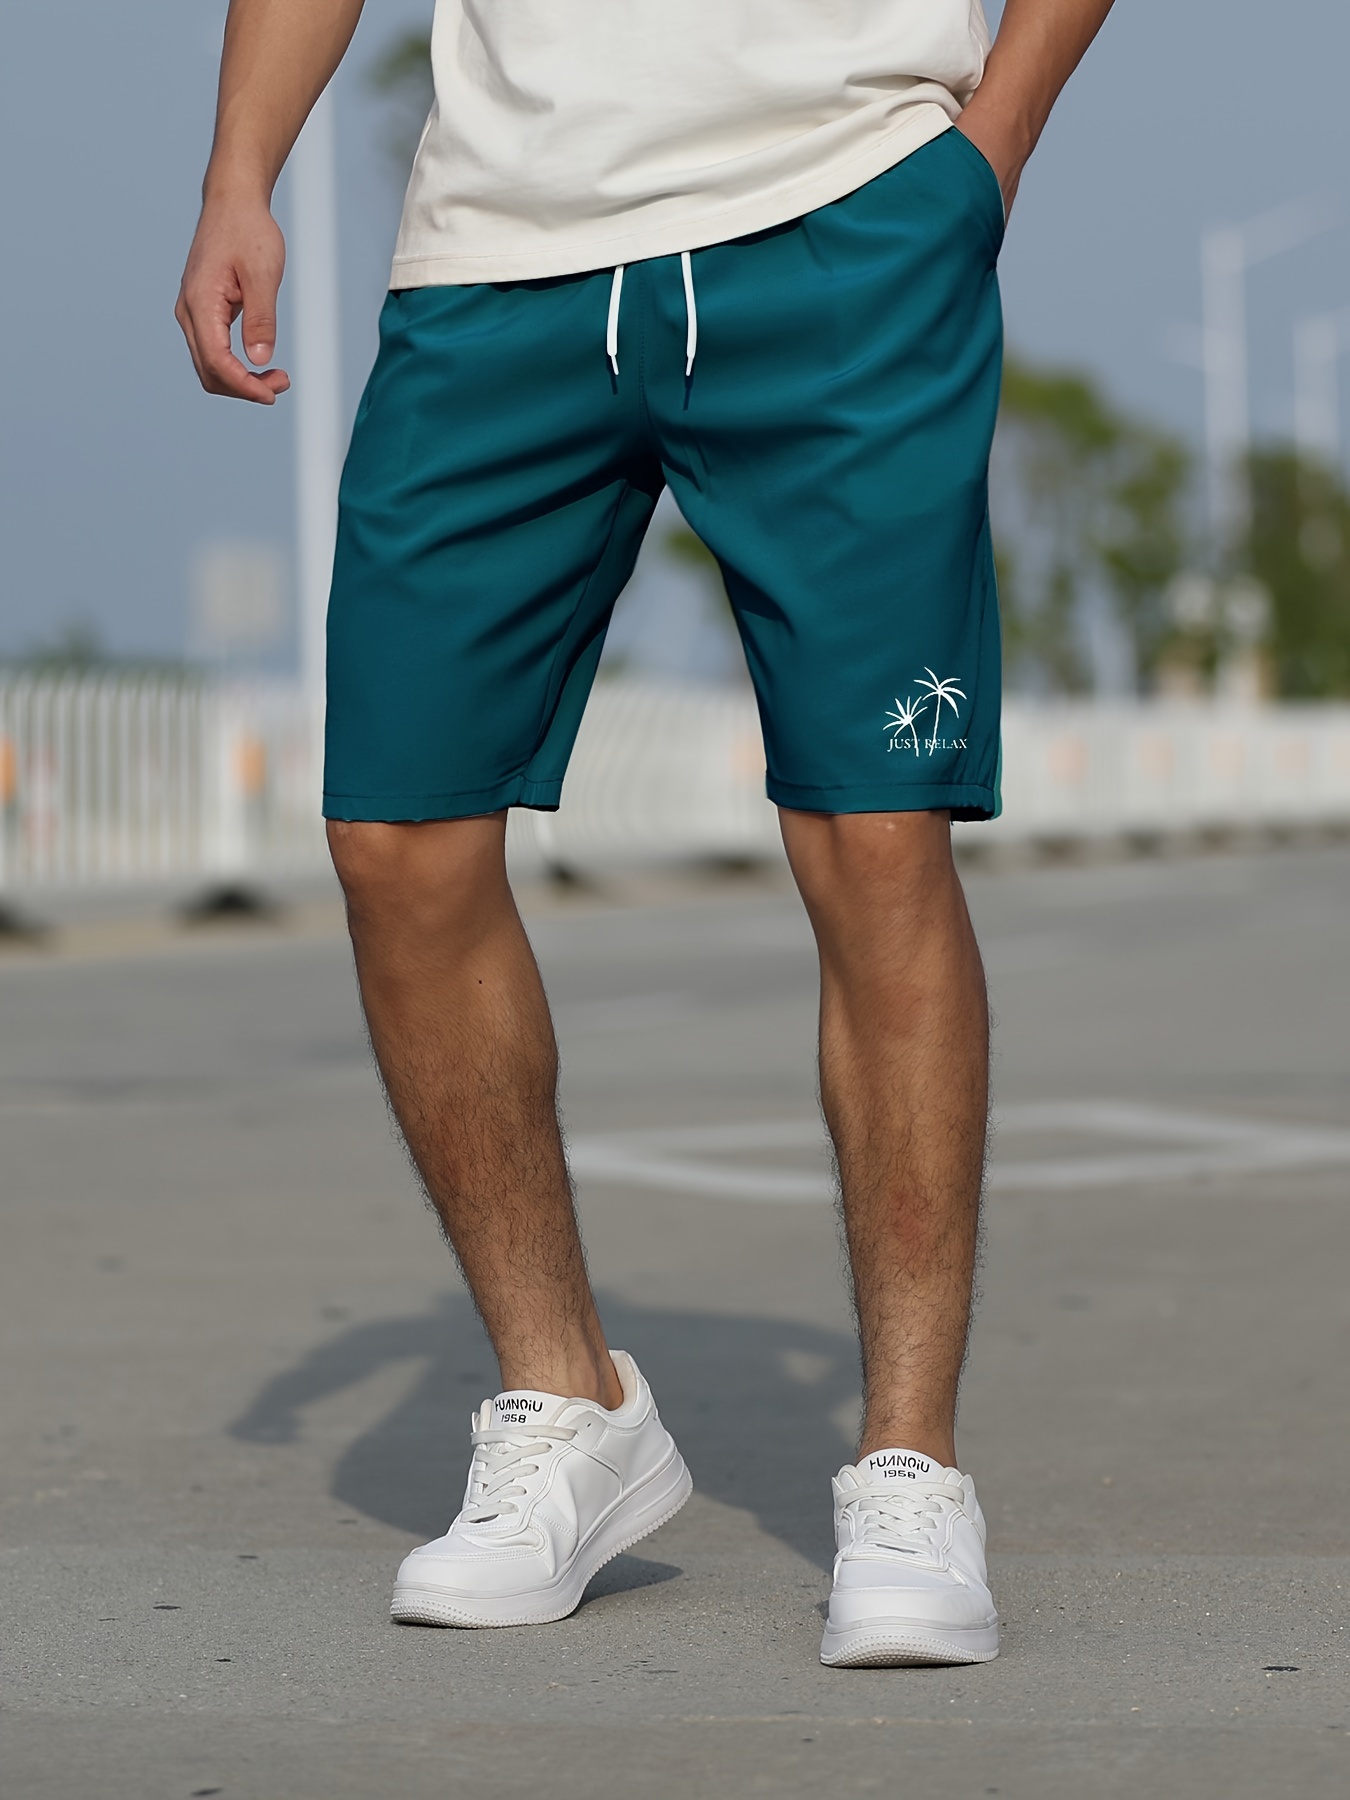 15 Best Summer Travelling Outfit Ideas for Men -Travel Style  Mens  outfits, Mens summer outfits, Mens casual outfits summer